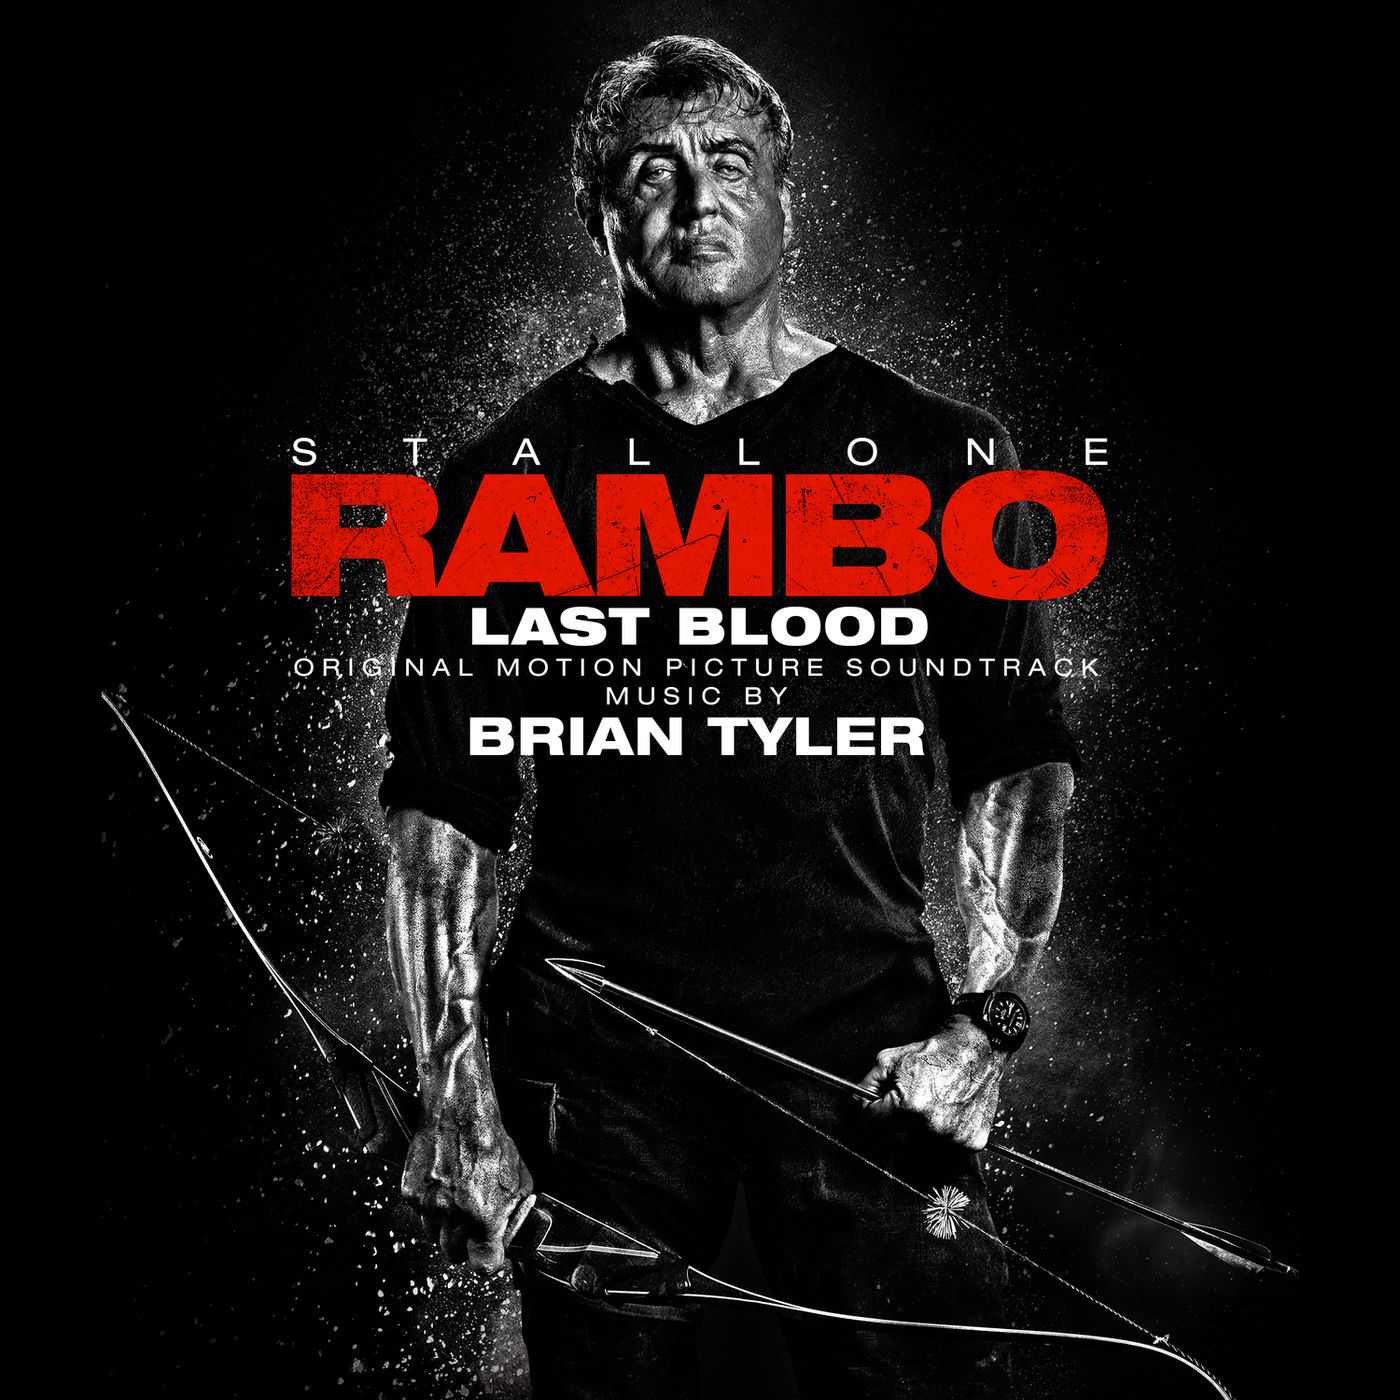 Brian Tyler - Rambo Last Blood (Original Motion Picture Soundtrack)